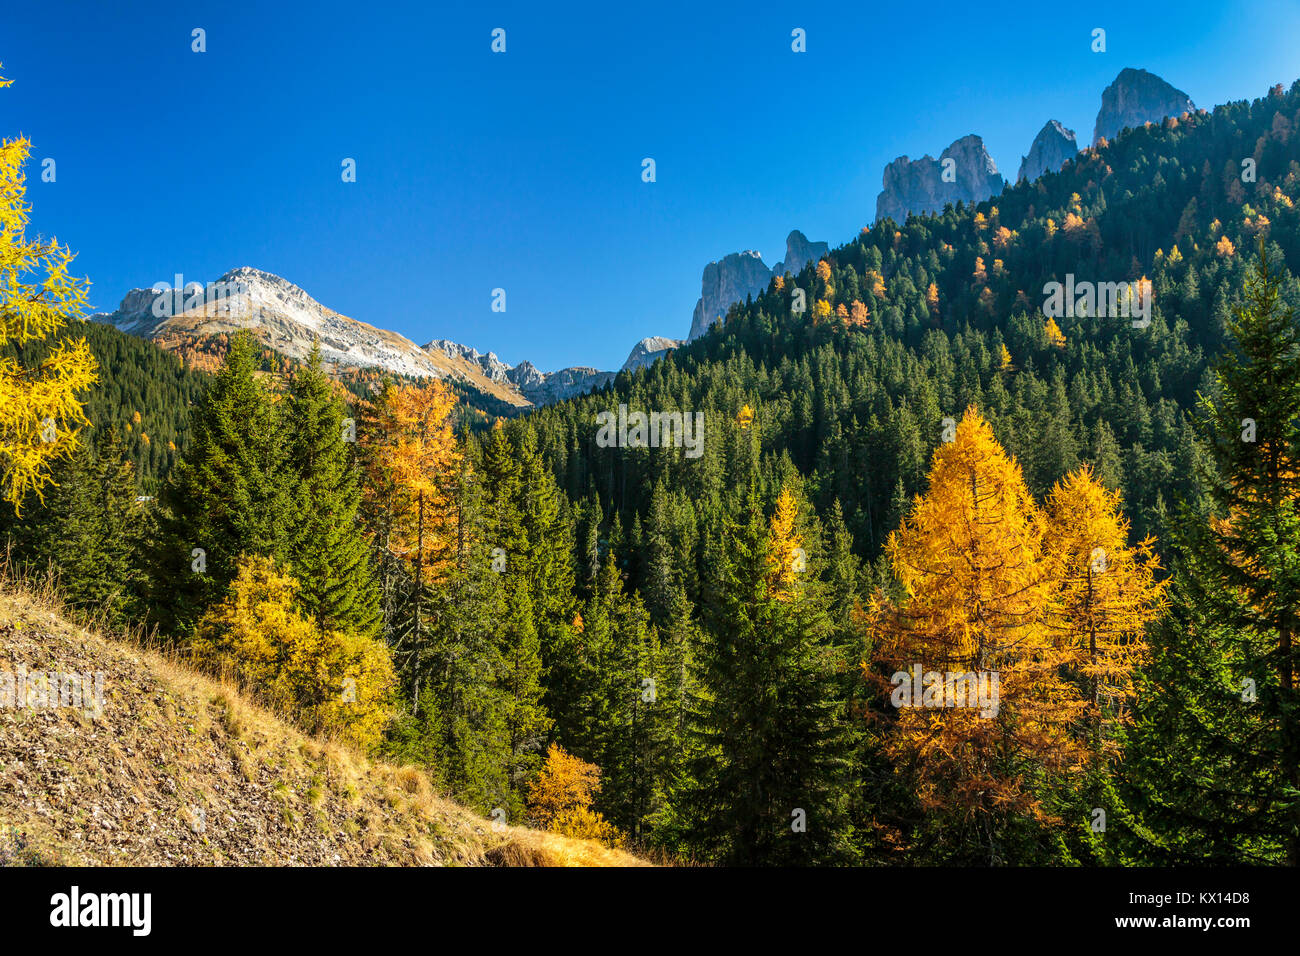 The Val di Funes Valley and fall foliage in the mountains near the village of Santa Maddalena with views of the Dolomites, South Tyrol, Italy, Europe. Stock Photo